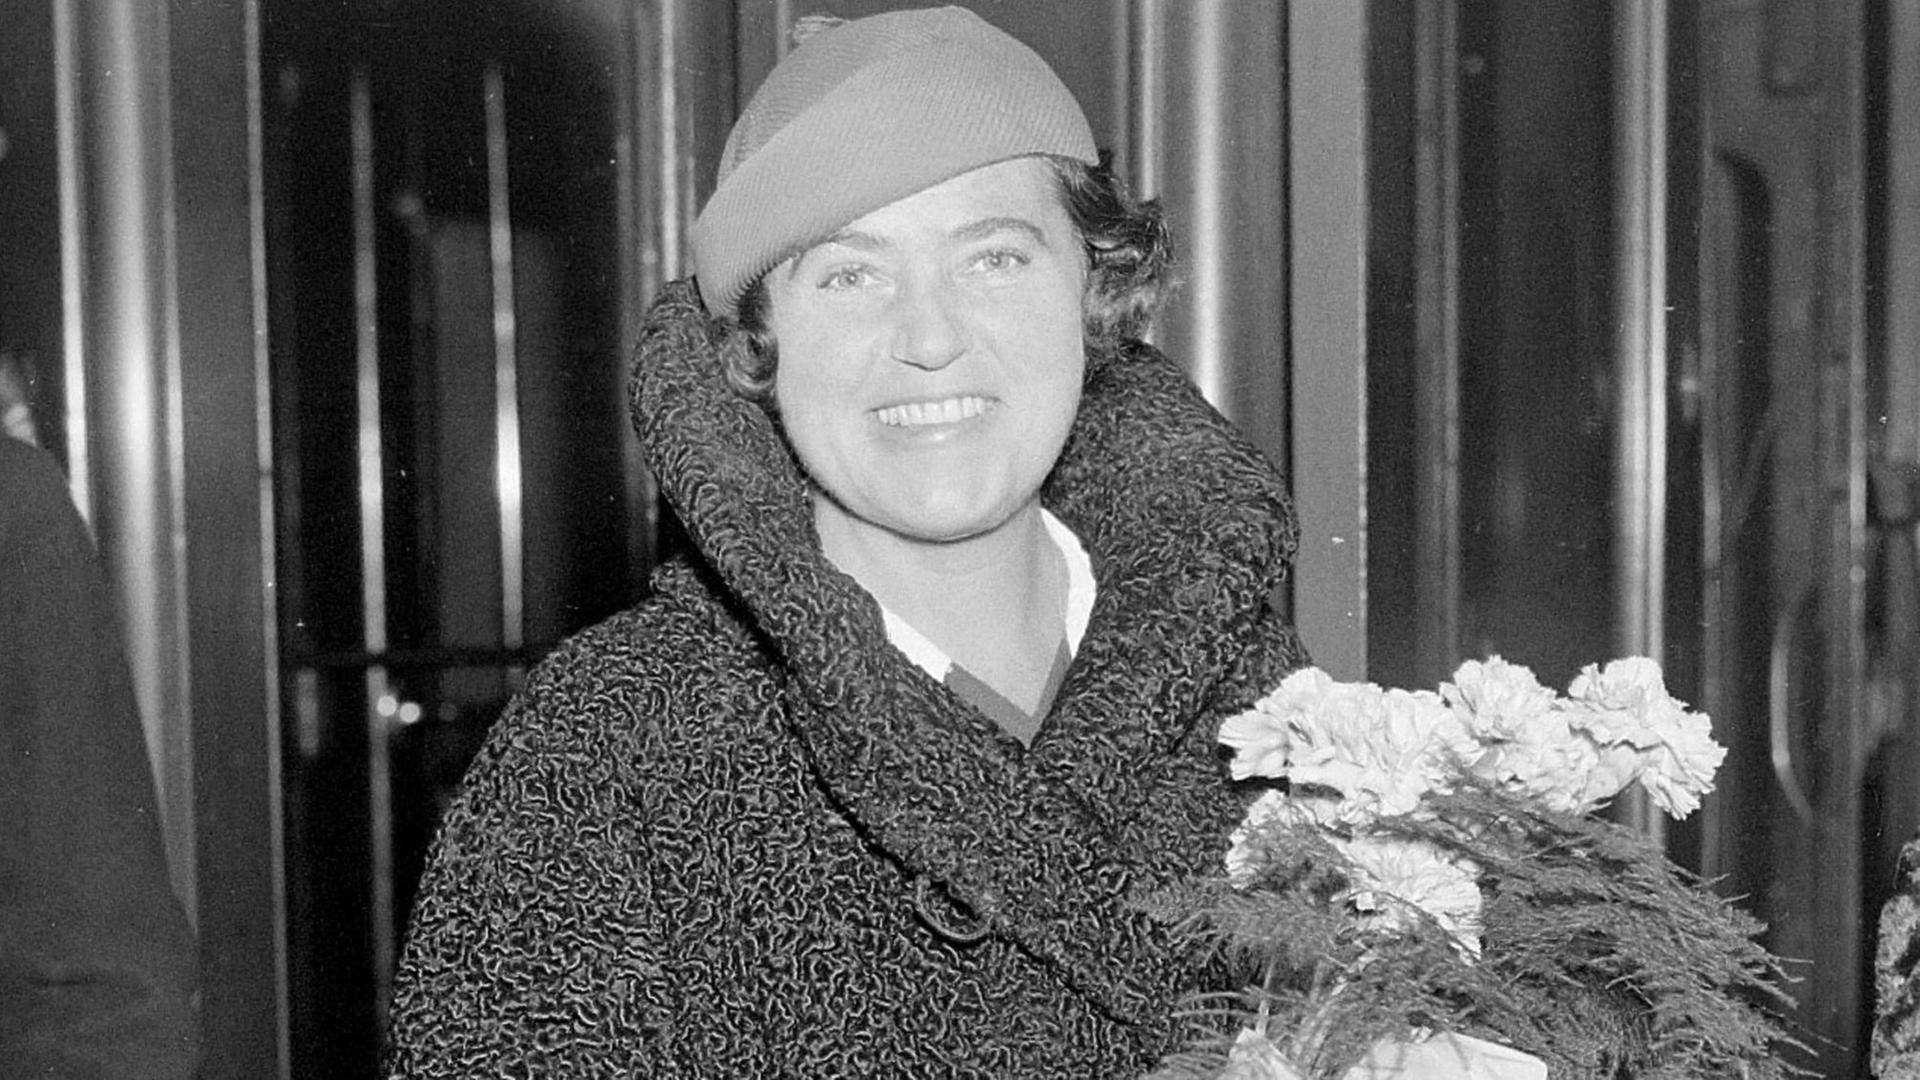 Lotte Lehmann ( famous German prima donna who shares with Elena Gerhardt the claim to be premier lieder singer ) has arrived in London - she will sing at her first lieder concert tomorrow ( Sunday ) - photo shows Lotte Lehmann on arrival at Victoria Station October 20th 1934 PUBLICATIONxINxGERxSUIxAUTxONLY UnitedArchives00950886 Lotte Lehmann Famous German Prima Donna Who Shares With Elena Gerhardt The Claim to Be Premier Songs Singer has arrived in London She will Sing AT her First Songs Concert Tomorrow Sunday Photo Shows Lotte Lehmann ON Arrival AT Victoria Station October 20th 1934 PUBLICATIONxINxGERxSUIxAUTxONLY UnitedArchives00950886